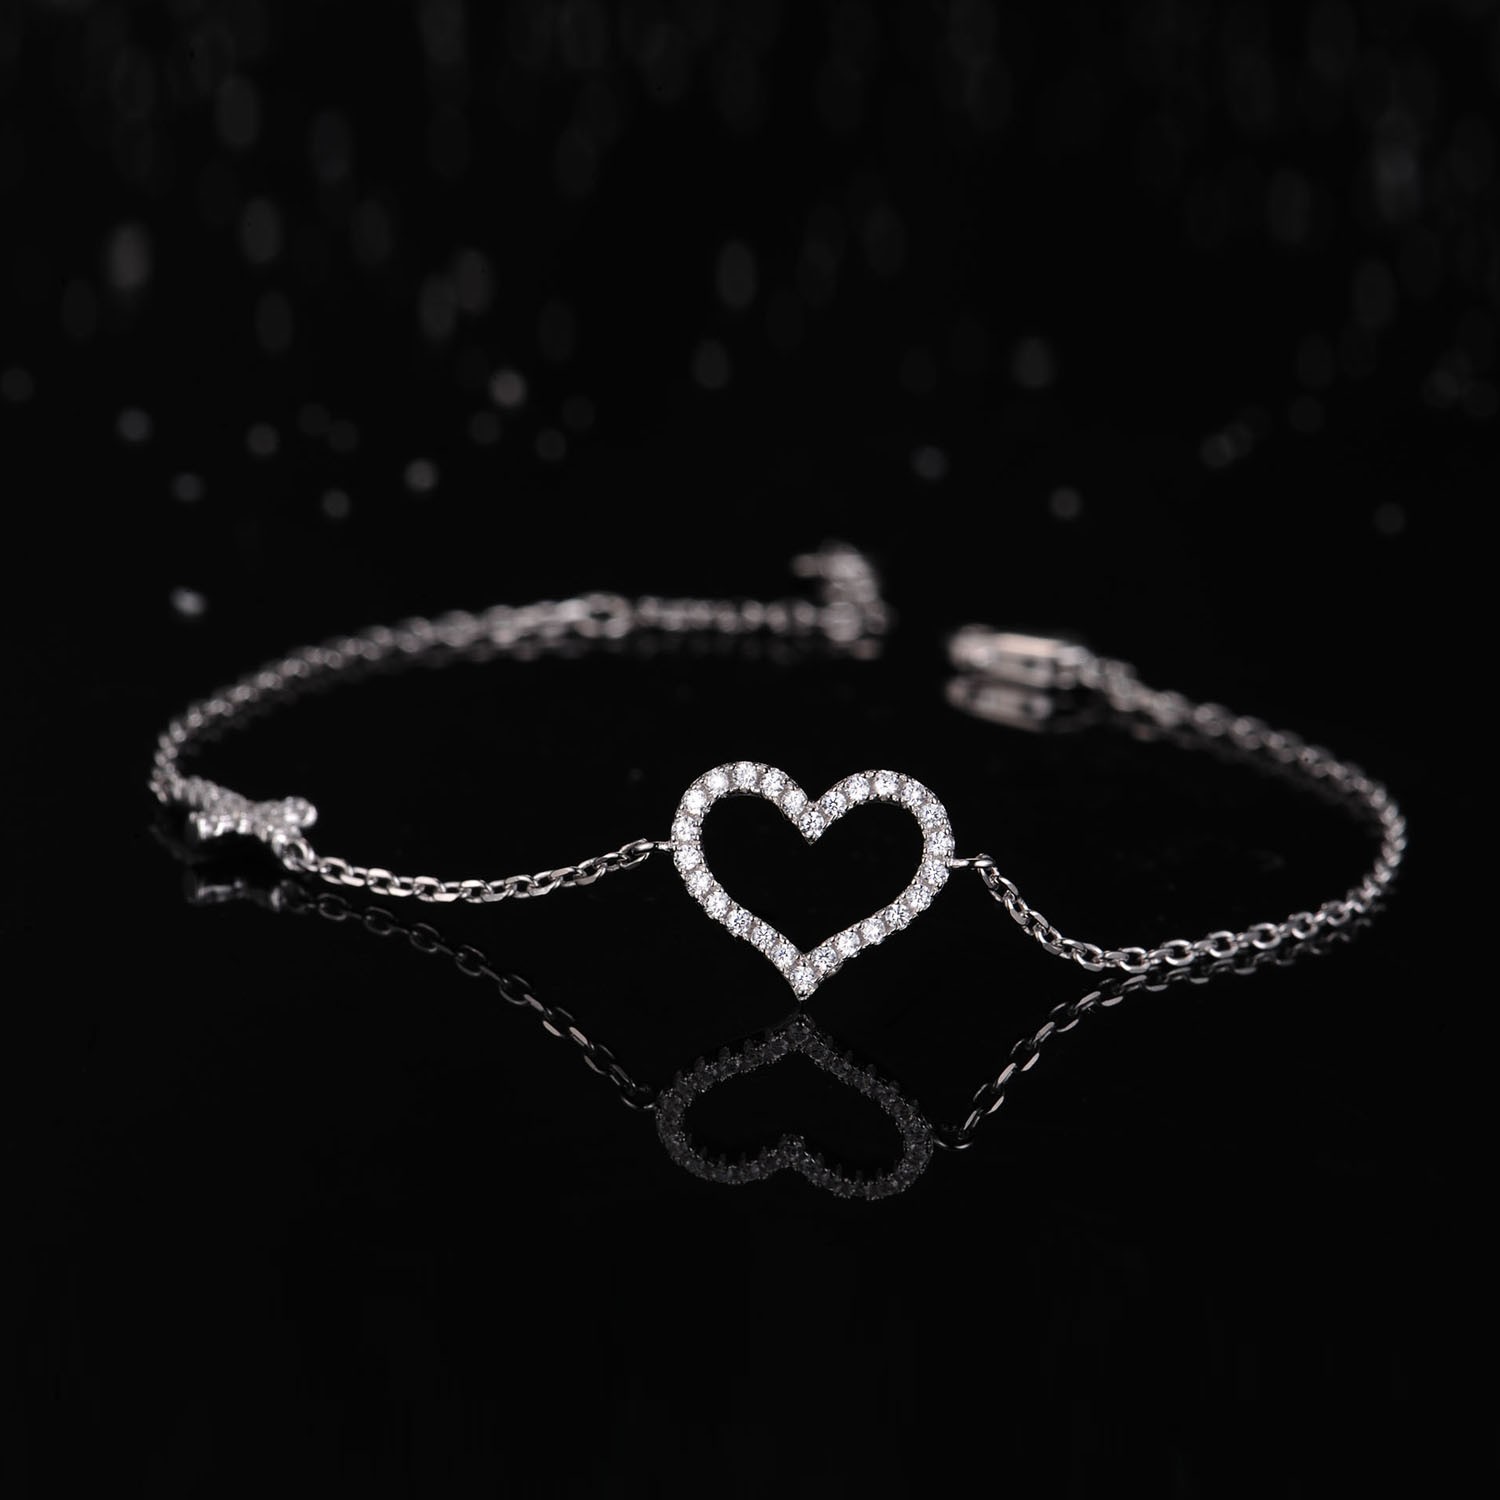 Fashion Cross Heart Shaped 925 Sterling Silver Bracelet Bangle Anniversary High Quality Jewelry Gift